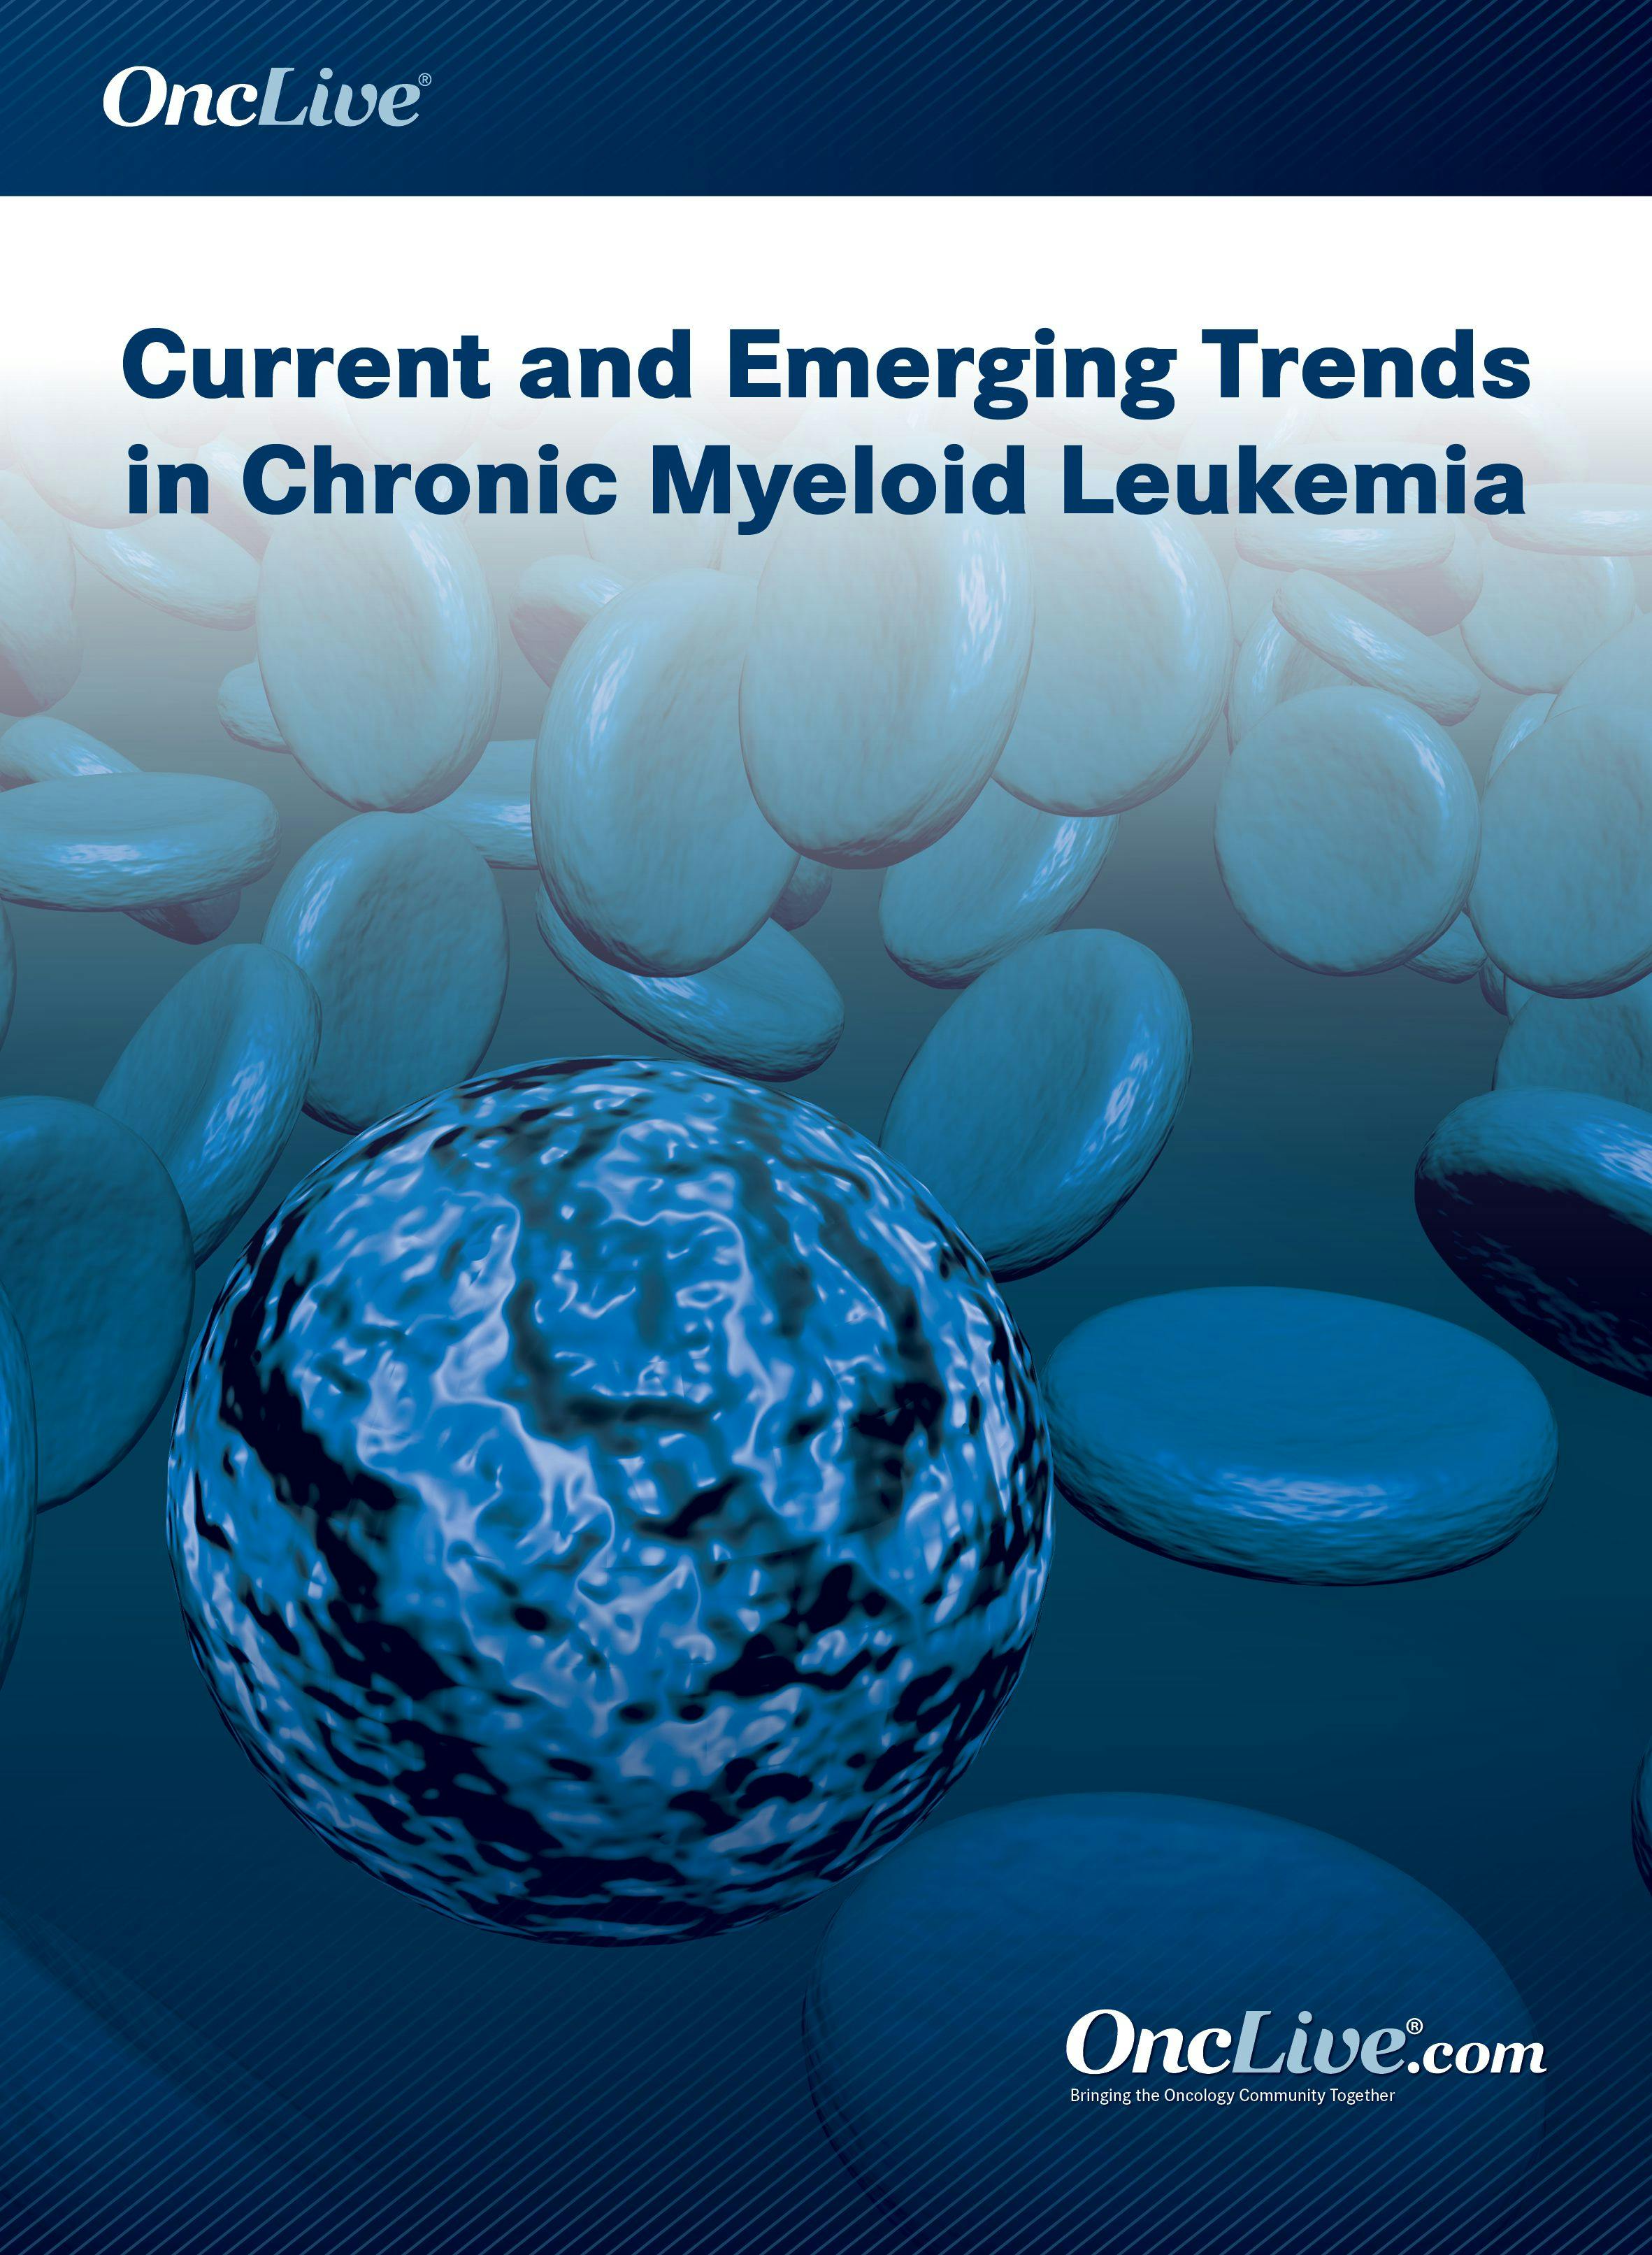 Current and Emerging Trends in Chronic Myeloid Leukemia